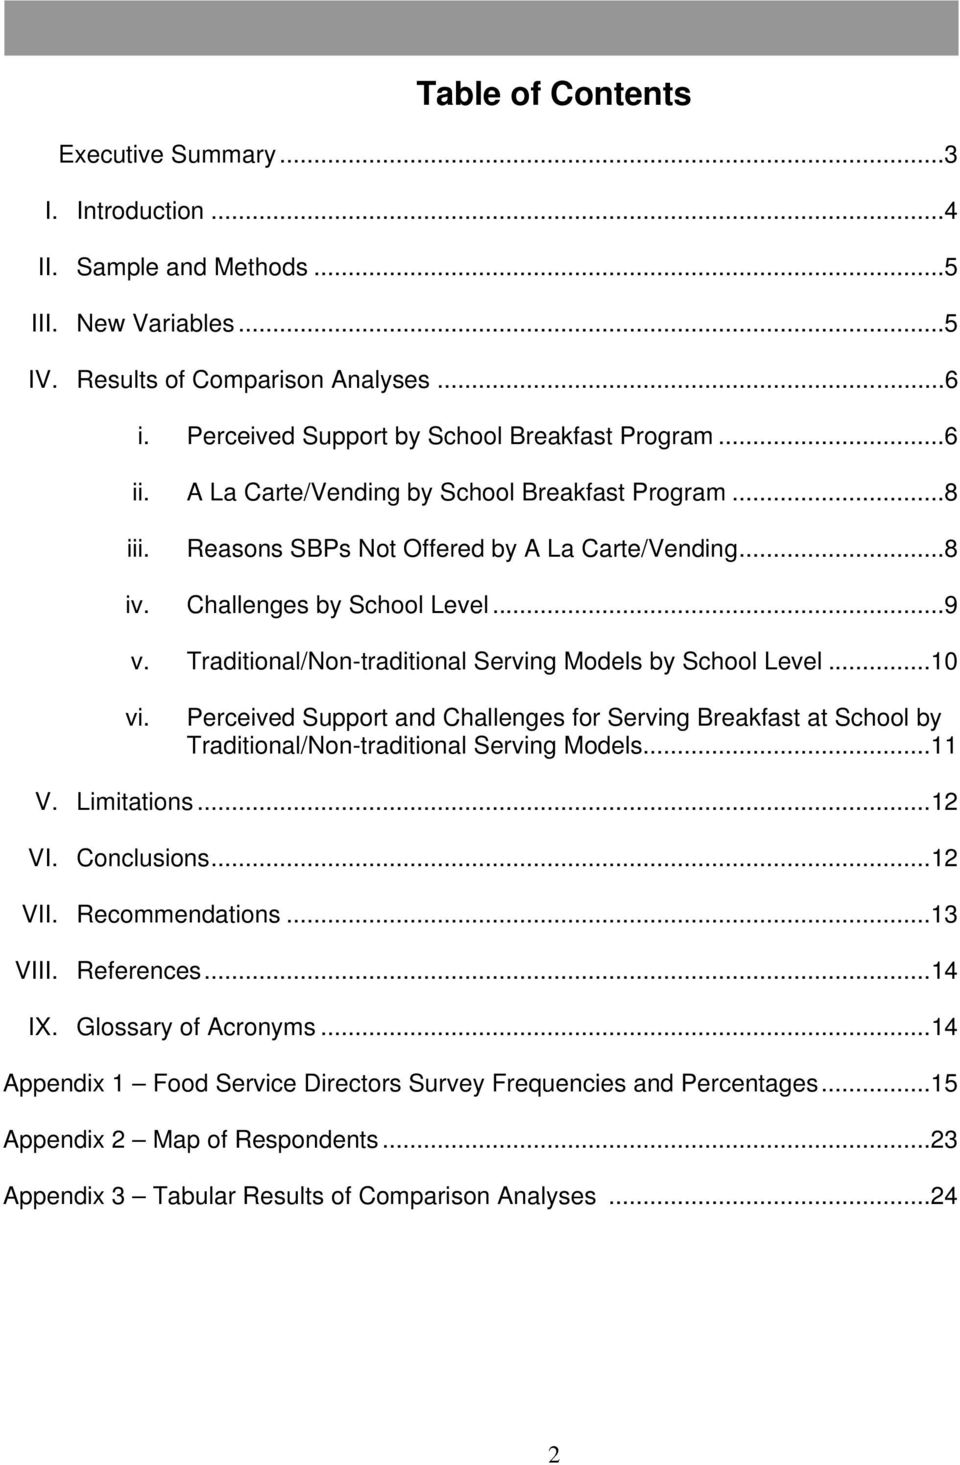 Traditional/Non-traditional Serving Models by School Level...10 vi. Perceived Support and Challenges for Serving Breakfast at School by Traditional/Non-traditional Serving Models...11 V. Limitations.